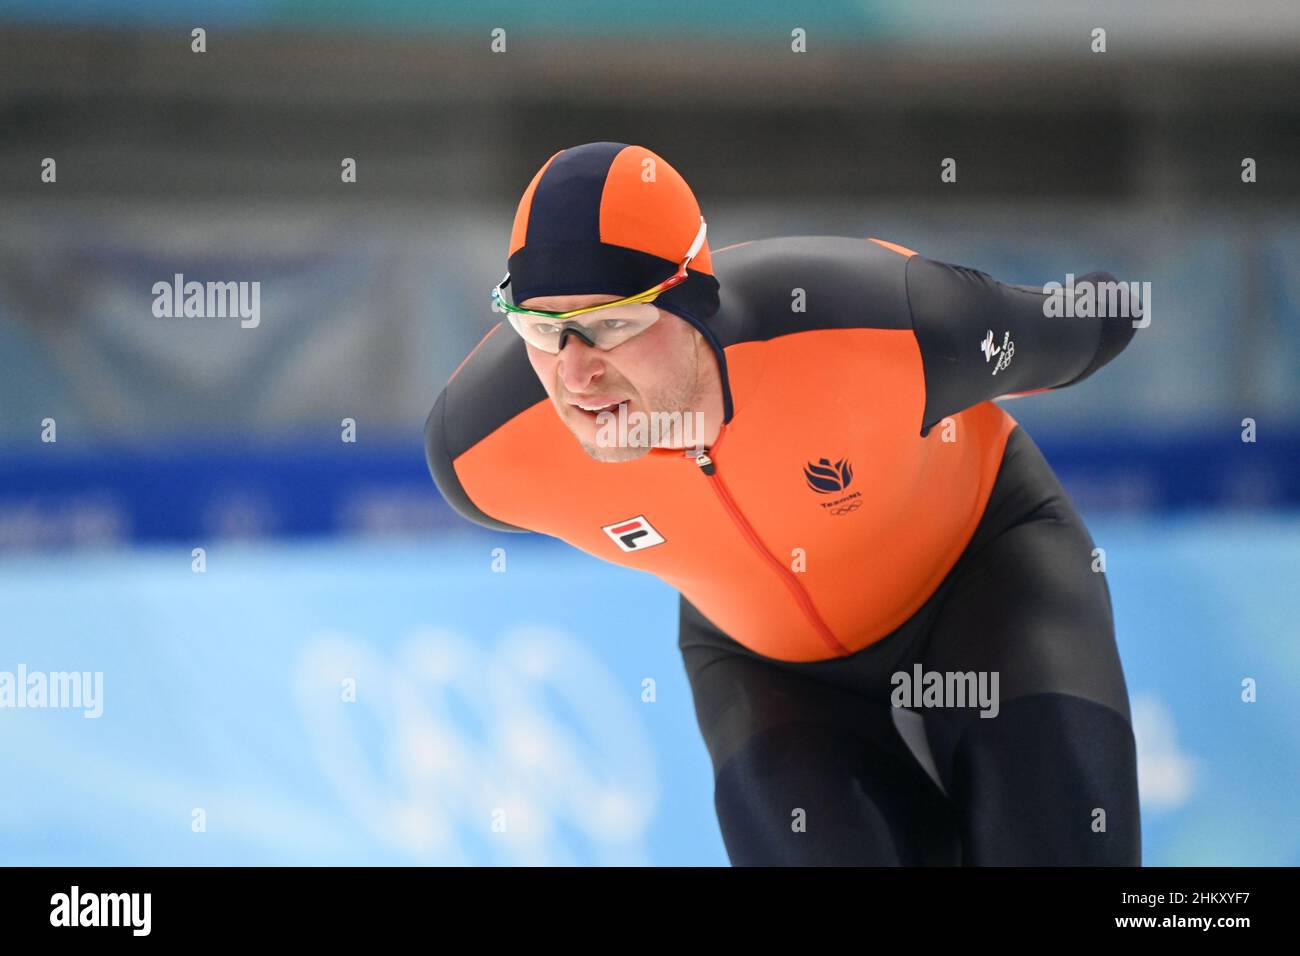 Beijing, China. 6th Feb, 2022. Sven Kramer of the Netherlands competes during the men's 5,000m final of speed skating at the National Speed Skating Oval in Beijing, capital of China, Feb. 6, 2022. Credit: Wu Wei/Xinhua/Alamy Live News Stock Photo